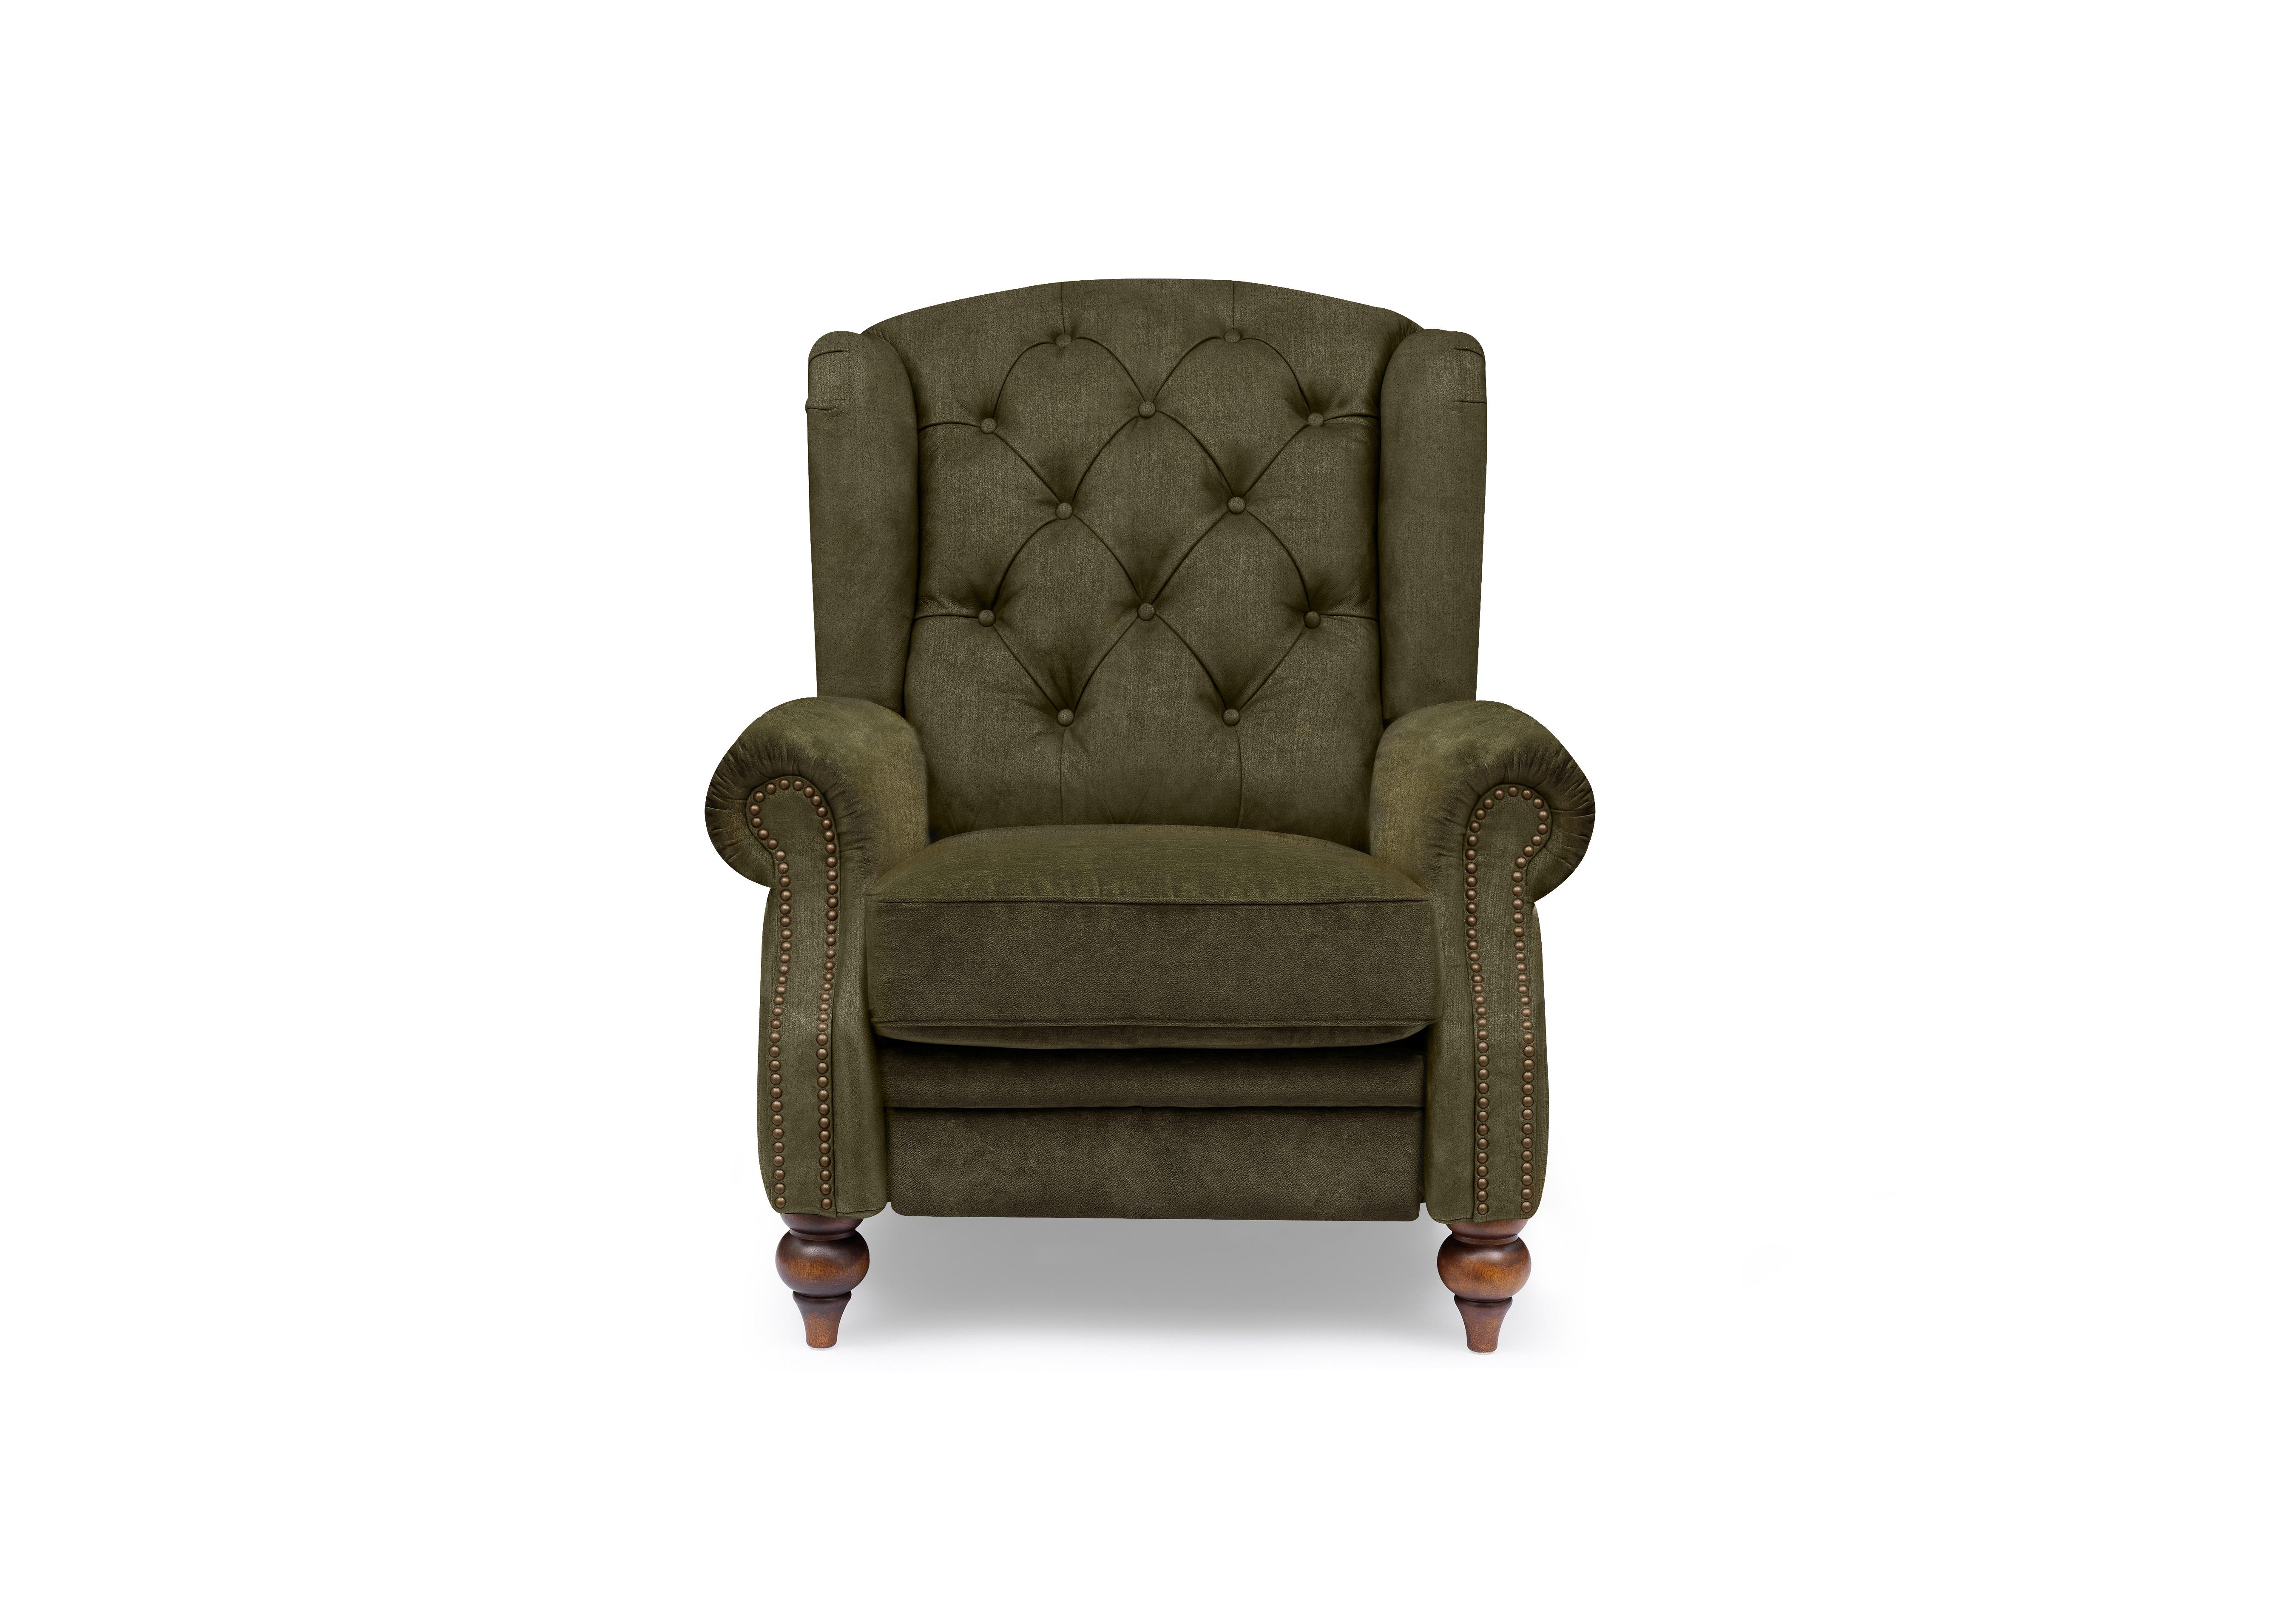 Shackleton Fabric Power Recliner Wing Chair in X3y1-W018 Pine on Furniture Village